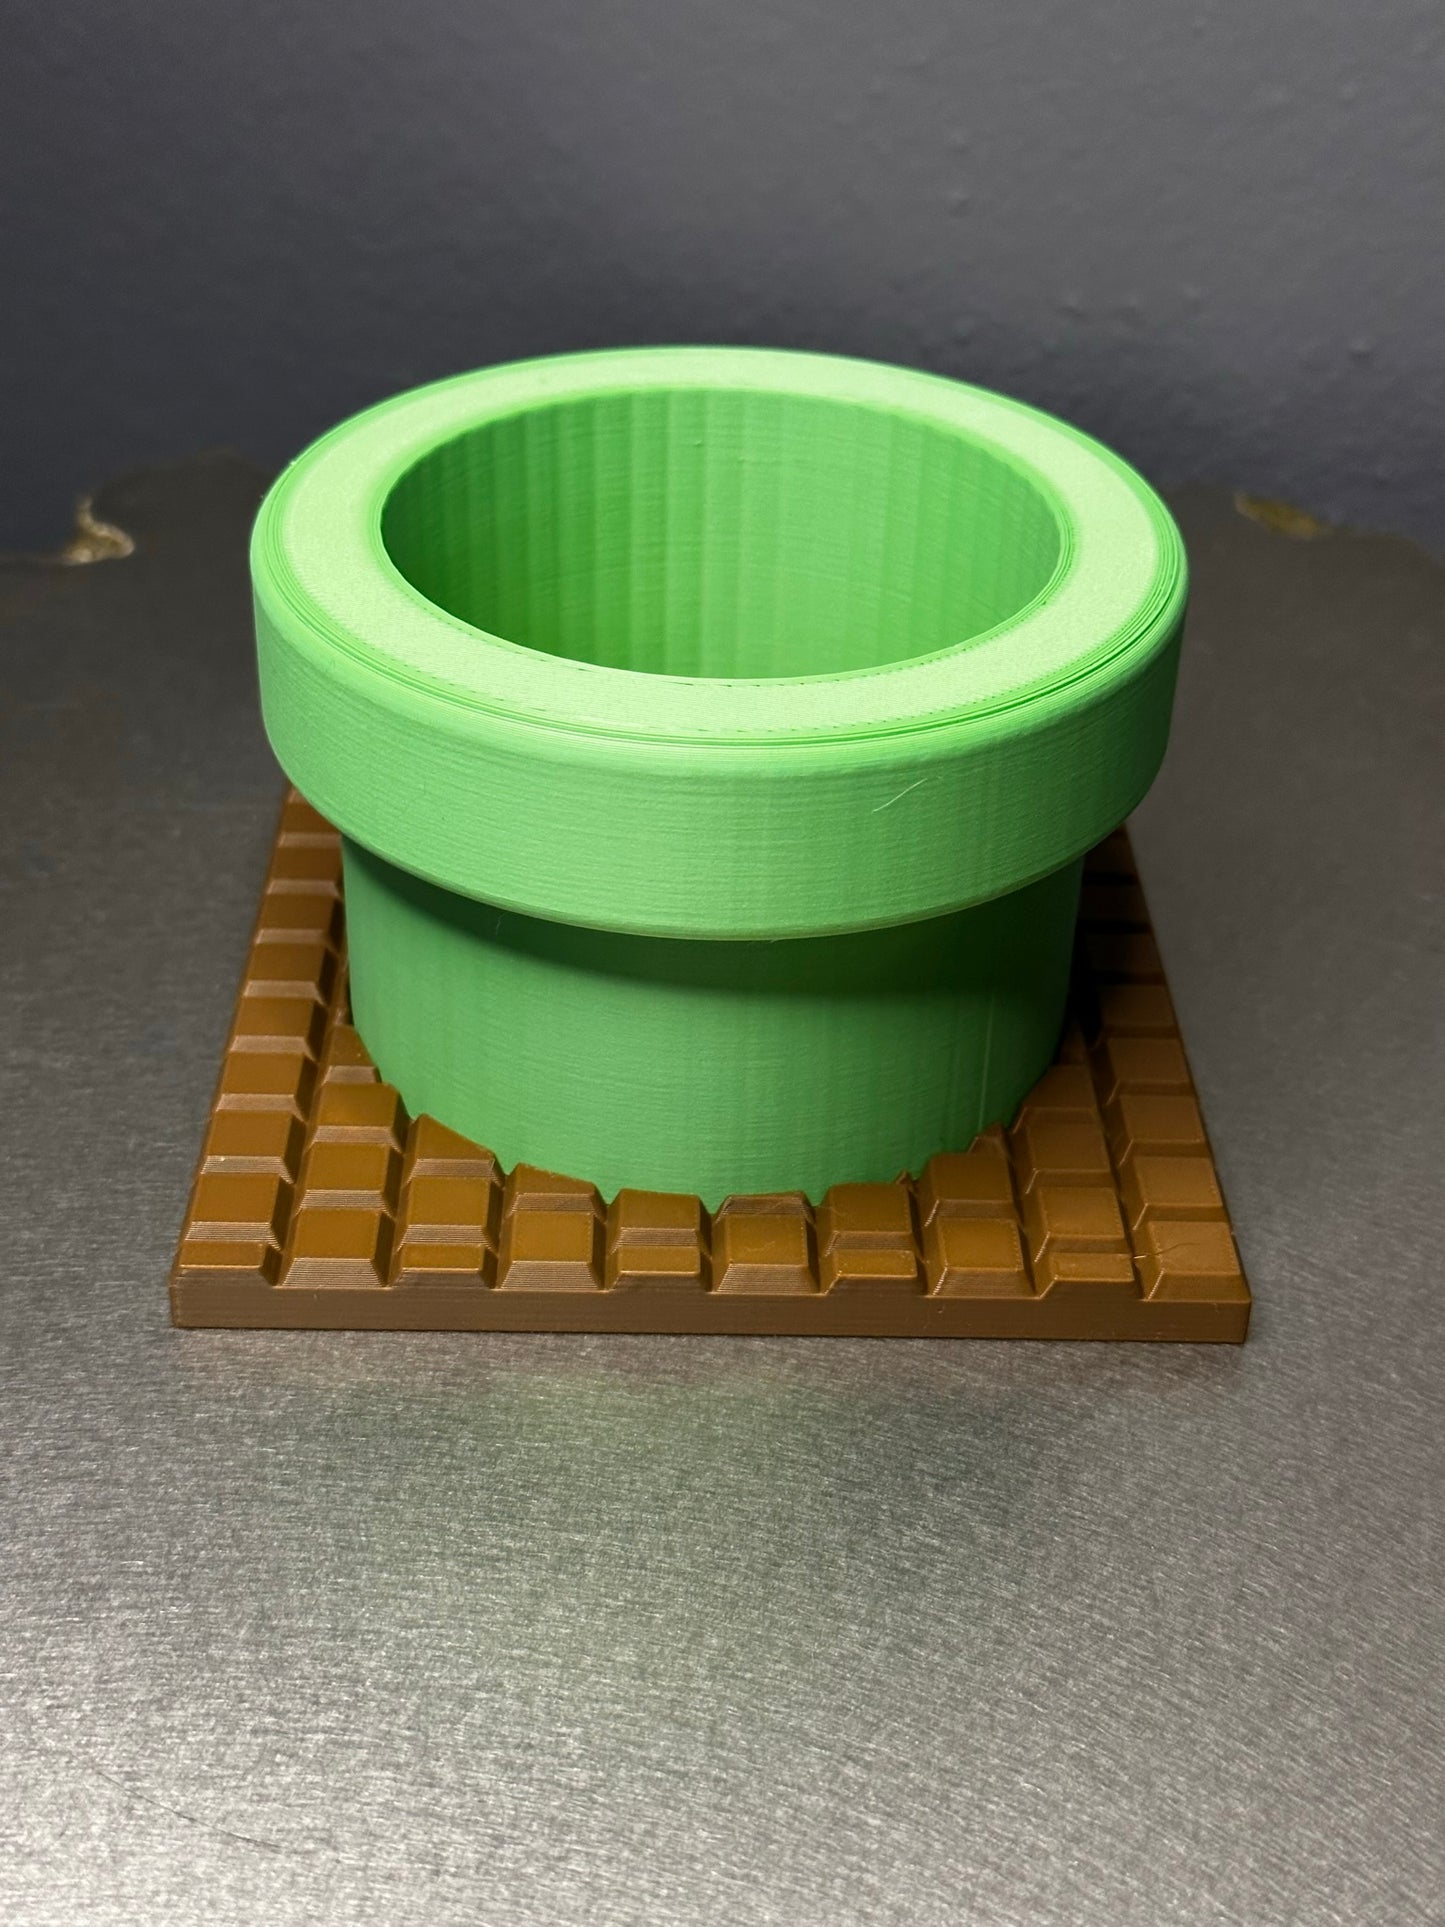 Super Mario Brothers Green Pipe Giant Cup Holder/Coaster - Handmade Drink Holder Inspired by the Iconic Game